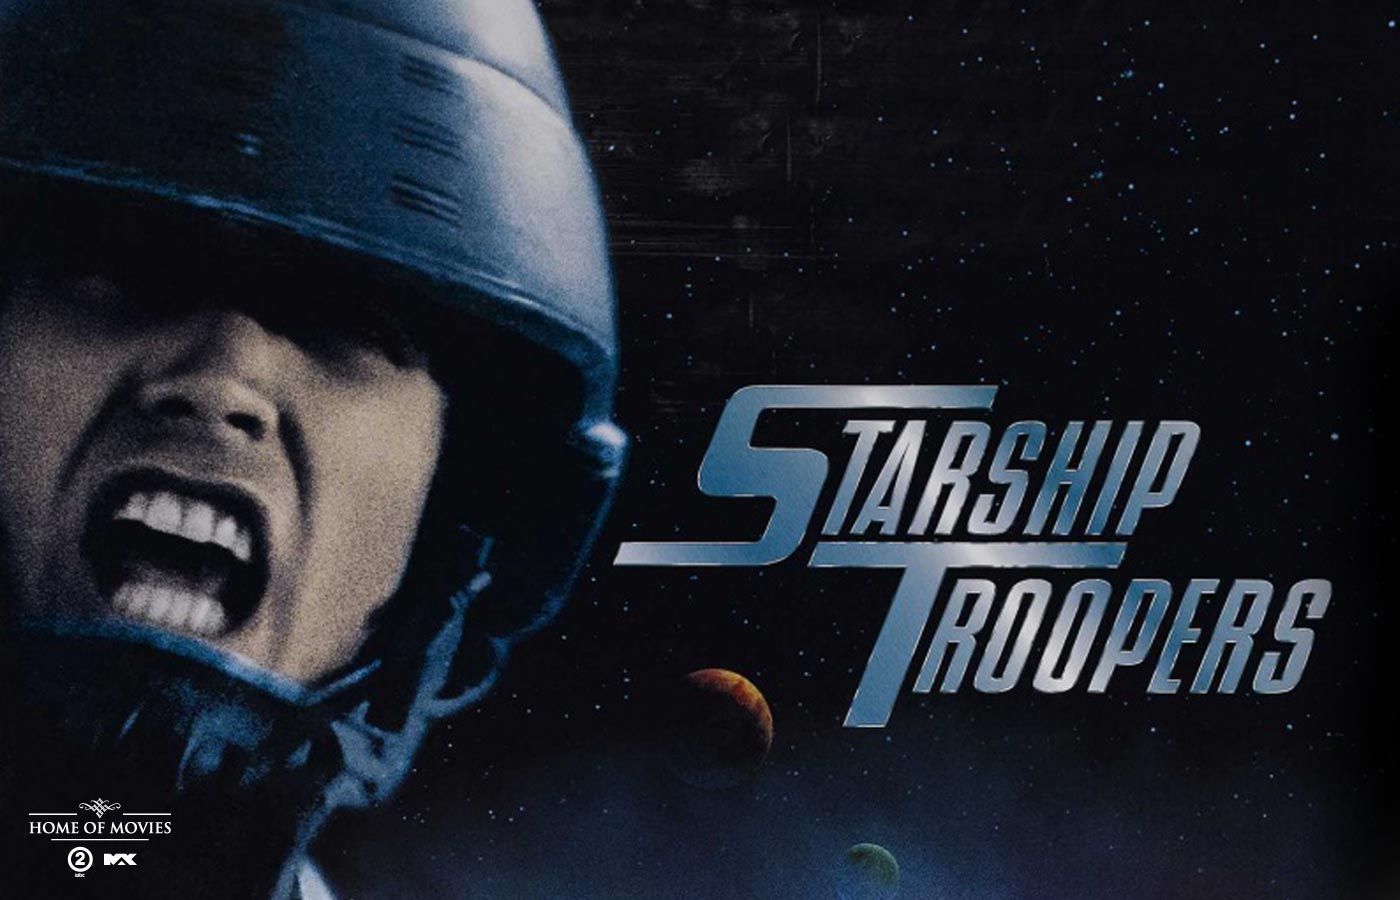 starship troopers wallpaper,album cover,font,movie,poster,space